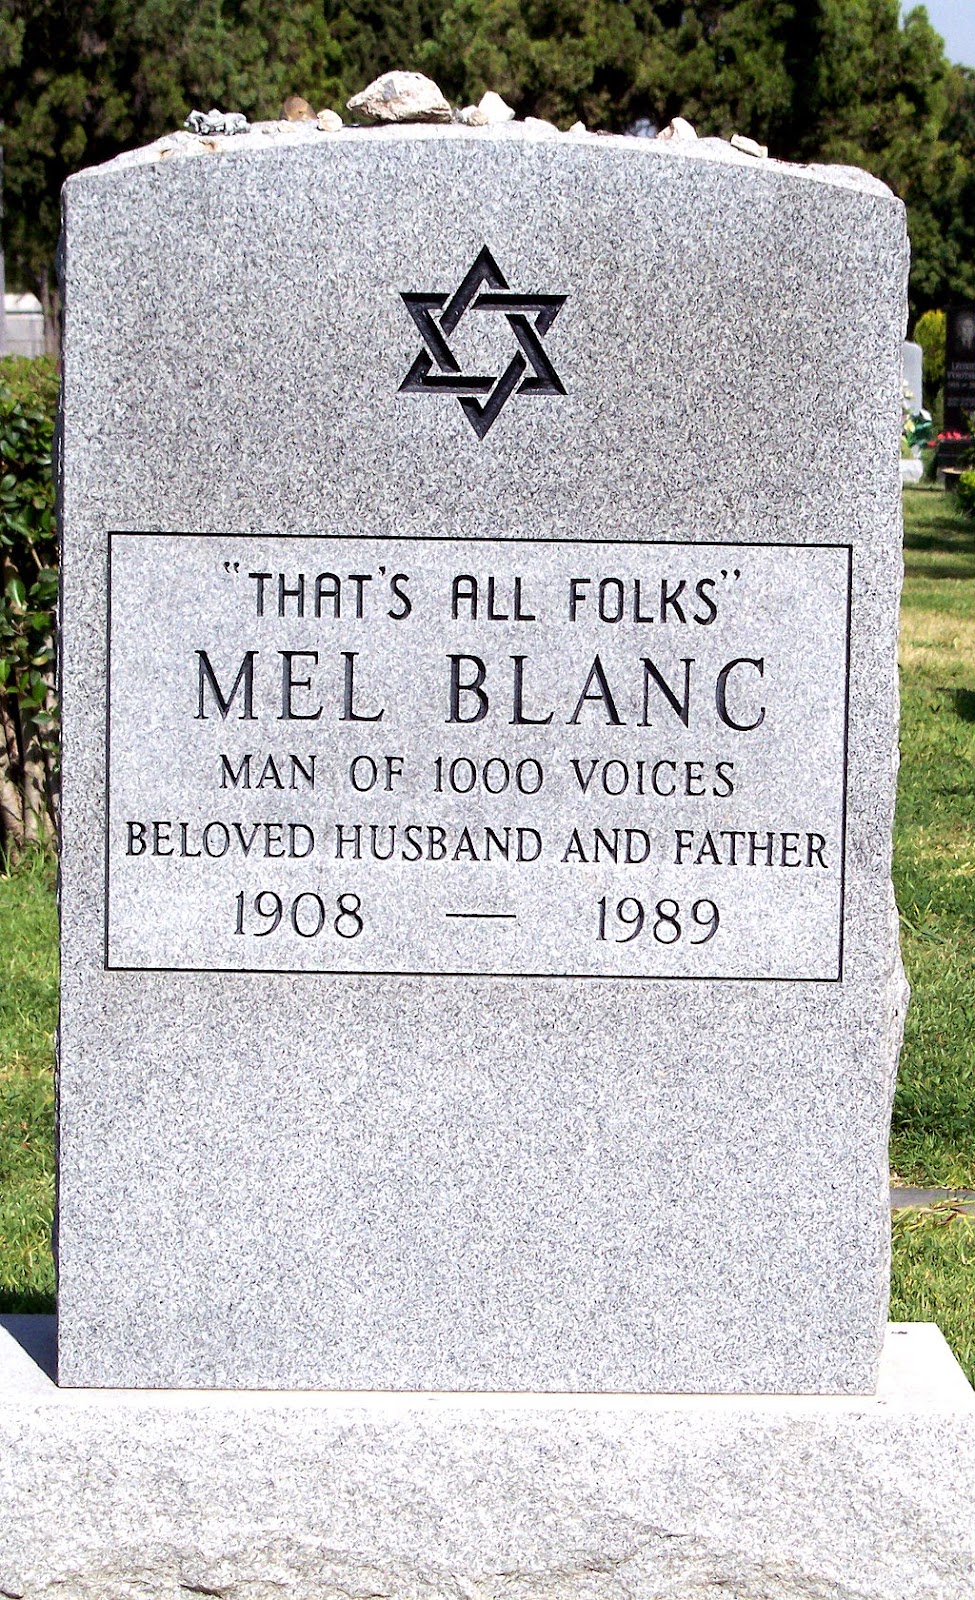 Mel Blanc's headstone at the "Hollywood Forever Cemetery" in Southern California. 